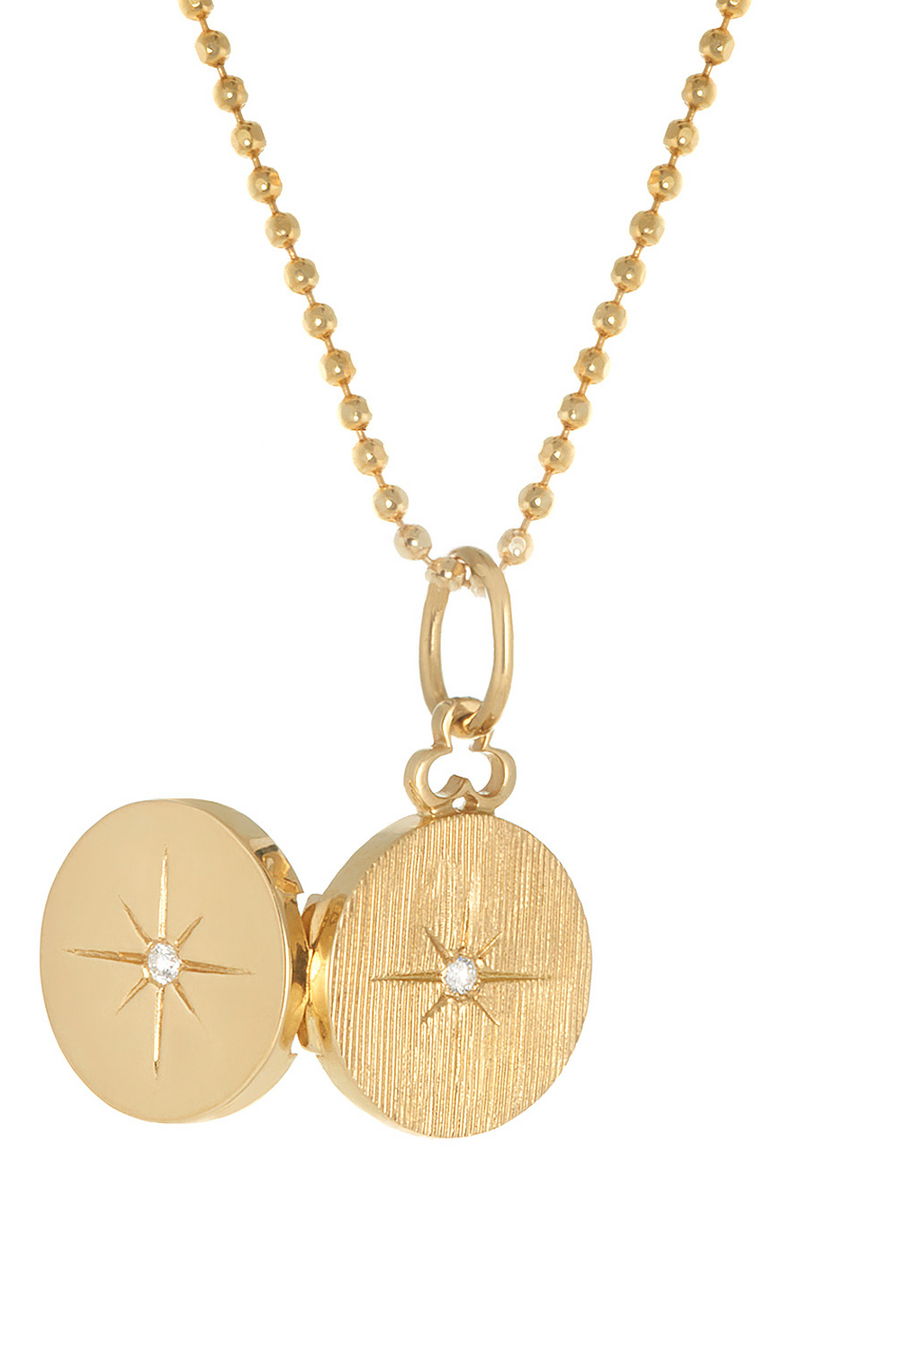 18k gold mini locket with a North Star diamond to carry your photos.